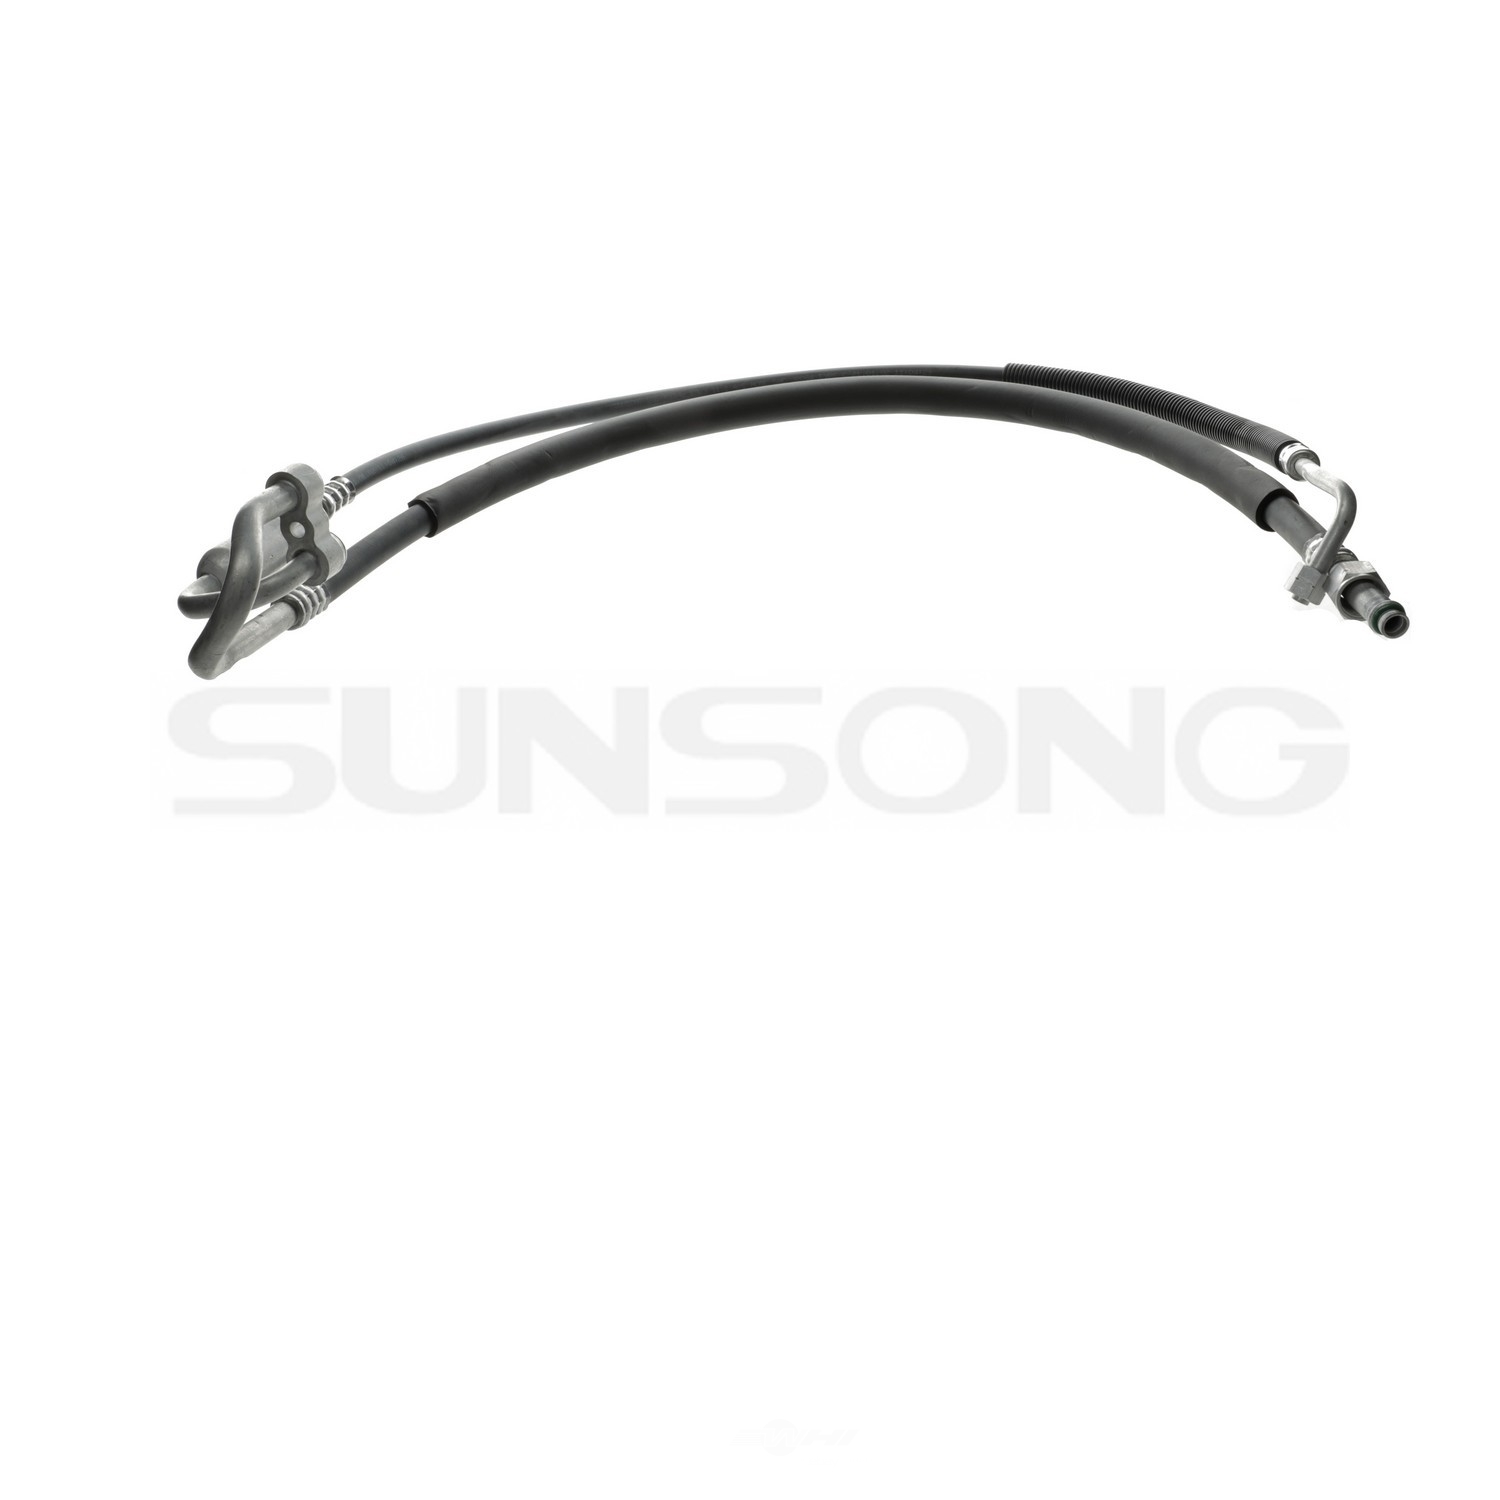 SUNSONG NORTH AMERICA - A/C Refrigerant Discharge / Suction Hose Assembly - SUG 5203261